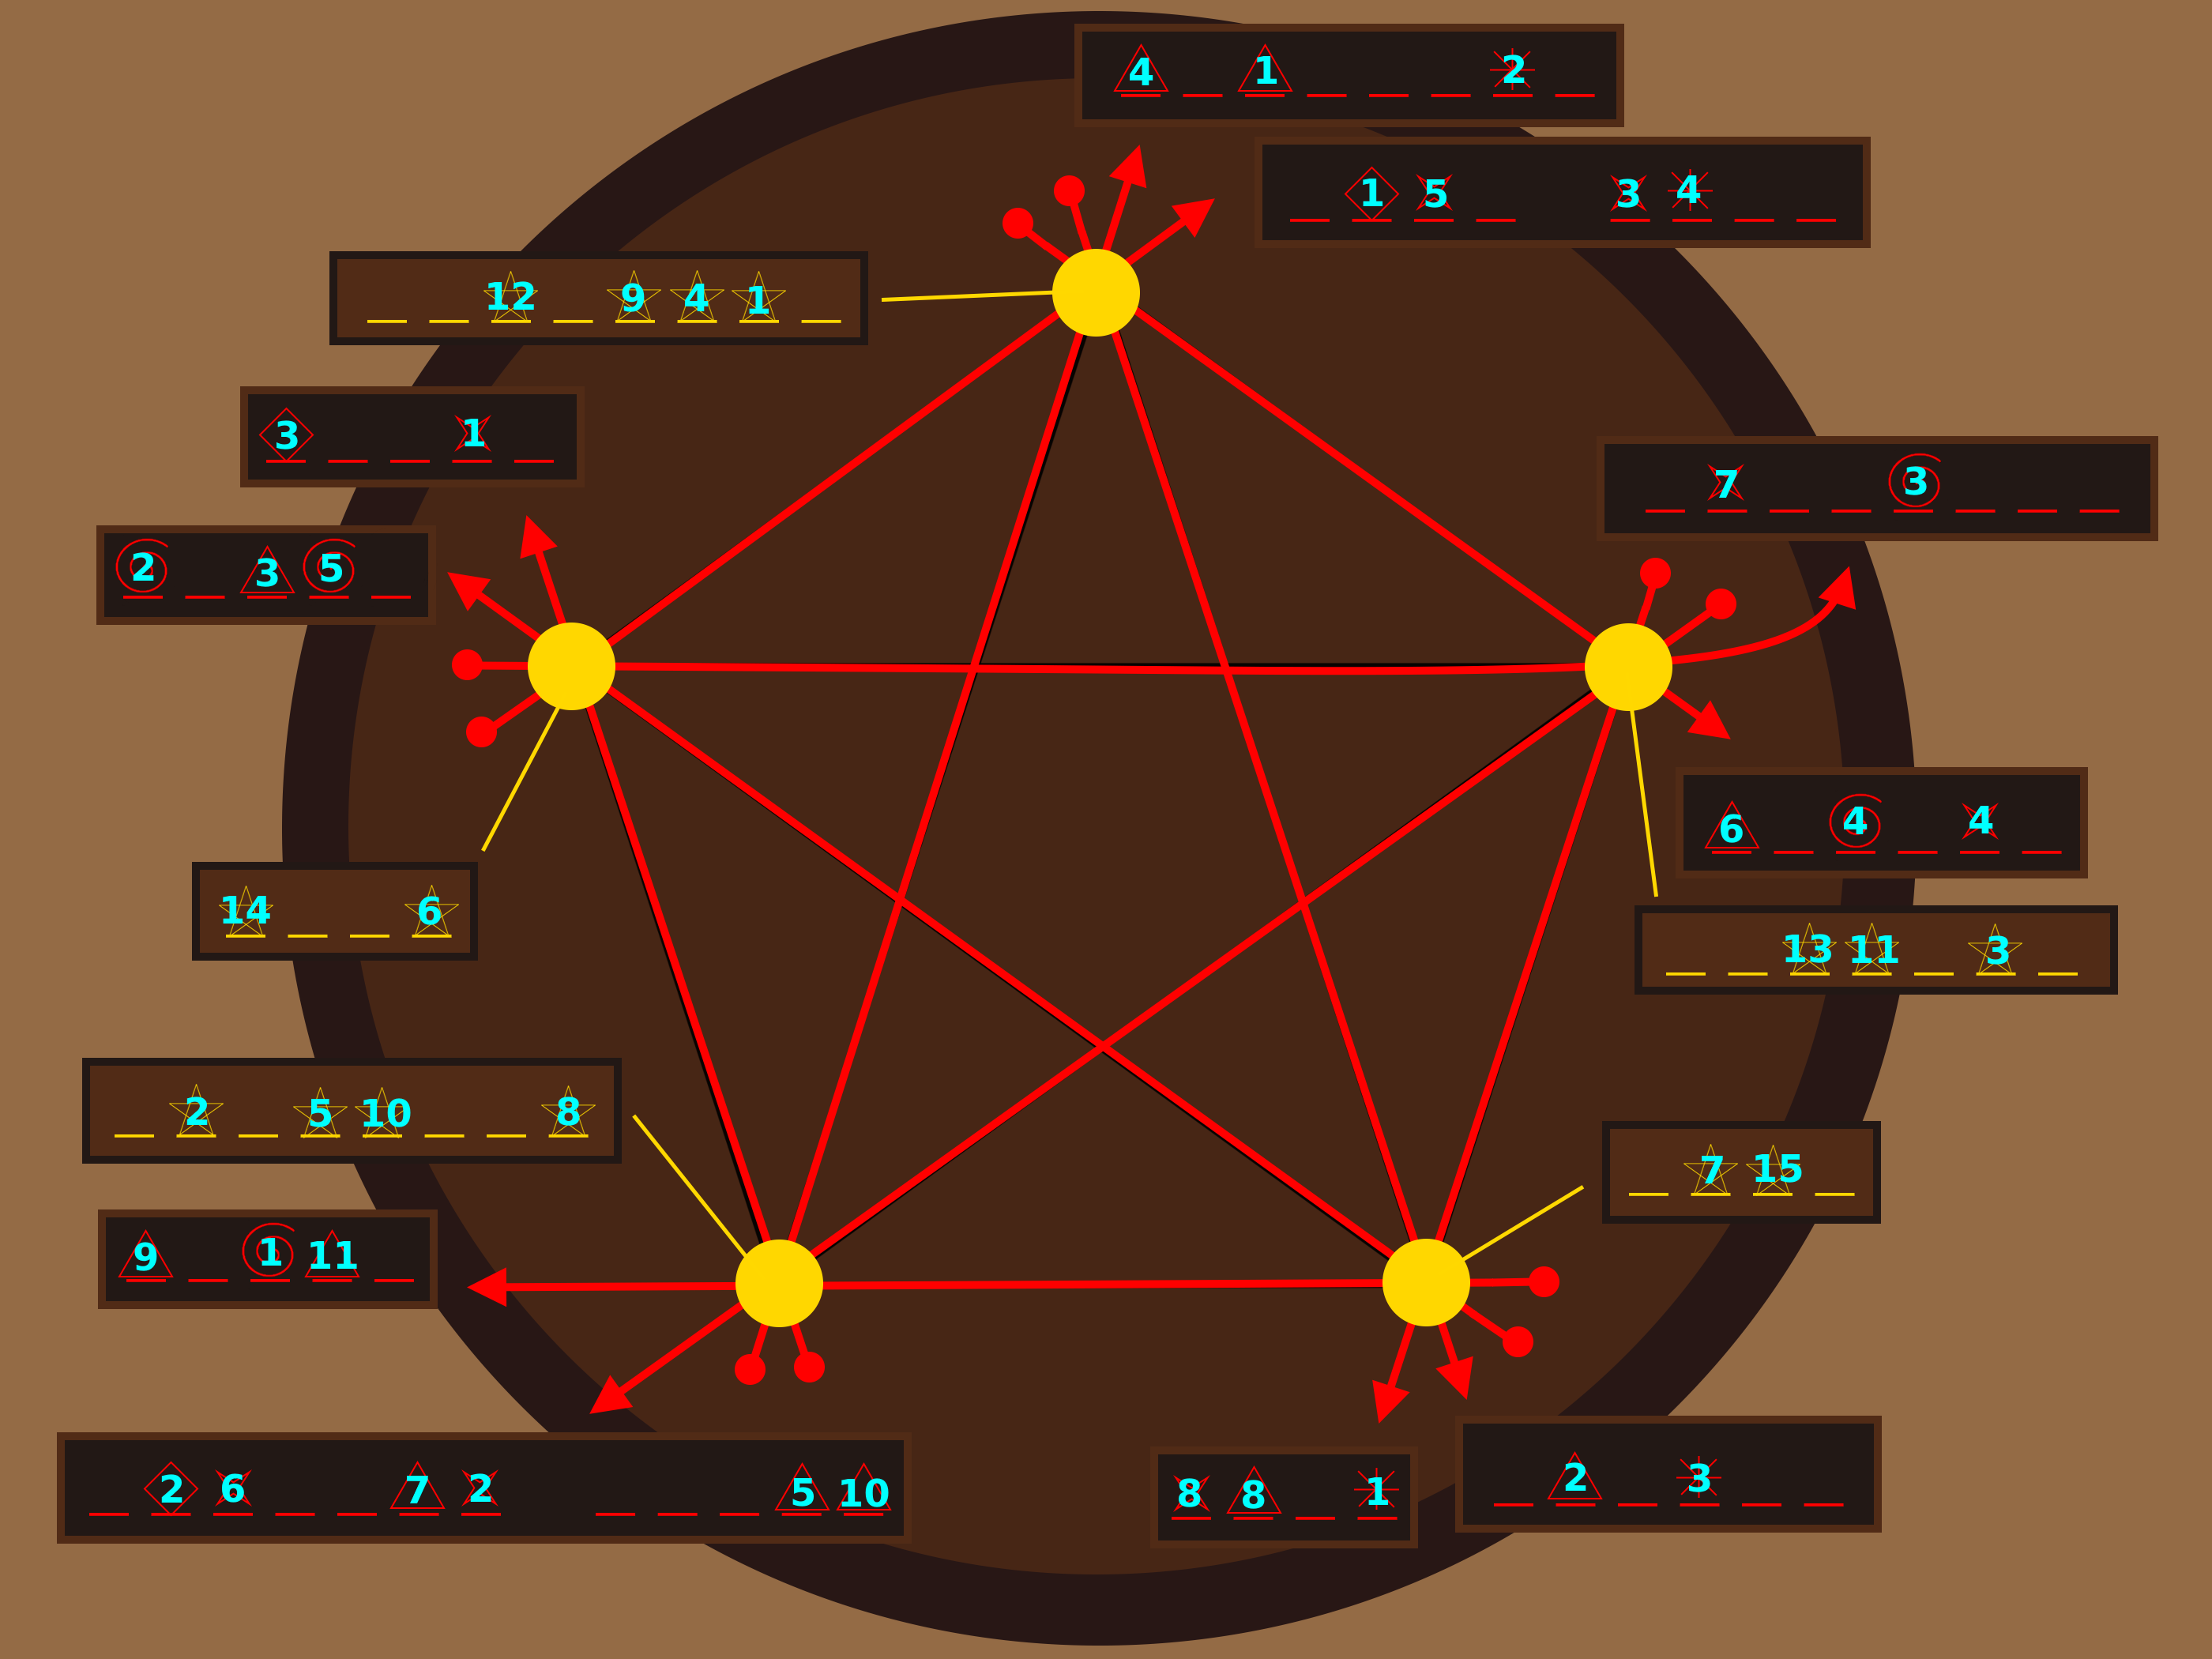 For a transcript of this alt-text, you may email contact@huntinality.com.

5 yellow nodes in a pentagon. Red lines connect each node to all of the other nodes, forming a five-pointed star inside a pentagon.
For the sake of this description, the node at the top of the pentagon will be referred to as Node 1, and the others will be numbered 2, 3, 4, and 5, going clockwise.

Brown boxes containing yellow blanks are connected by yellow lines to each of the nodes. Some of the blanks have yellow 5-pointed stars with blue numbers written on them.
Node 1's box has 8 blanks. The 3rd blank has a 12, the 5th blank has a 9, the 6th blank has a 4, and the 7th blank has a 1.
Node 2's has 7 blanks. The 3rd blank has a 13, the 4th blank has an 11, and the 6th blank has a 3.
Node 3's has 4 blanks. The 2nd blank has a 7 and the 3rd blank has a 15.
Node 4's has 8 blanks. The 2nd blank has a 2, the 4th blank has a 5, the 5th blank has a 10, and the 8th blank has an 8.
Node 5's has 4 blanks. The 1st blank has a 14 and the 4th blank has a 6.

A red arrow begins at a red circle, travels through Node 1 and Node 2, then ends, pointing toward a brown box. The box has 6 red blanks, some of which contain red shapes with blue numbers written on them.
The 1st blank has a triangle labeled 6, the 3rd blank has a spiral labeled 4, and the 5th blank has a 4-pointed star labeled 4.

A red arrow begins at a red circle, travels through Node 1 and Node 3, then ends, pointing toward a brown box. The box has 6 red blanks.
The 2nd blank has a triangle labeled 2 and the 4th blank has an asterisk labeled 3.

A red arrow begins at a red circle, travels through Node 2 and Node 3, then ends, pointing toward a brown box. The box has 4 red blanks.
The 1st blank has a 4-pointed star labeled 8, the 2nd blank has a triangle labeled 8, and the 4th blank has an asterisk labeled 1.

A red arrow begins at a red circle, travels through Node 2 and Node 4, then ends, pointing toward a brown box. The box has 7 red blanks, then a space, then 5 red blanks.
The 2nd blank has a diamond labeled 2, the 3rd blank has a 4-pointed star labeled 6, the 6th blank has a triangle labeled 7, the 7th blank has a 4-pointed star labeled 2, the 11th blank has a triangle labeled 5, and the 12th blank has a triangle labeled 10.

A red arrow begins at a red circle, travels through Node 3 and Node 4, then ends, pointing toward a brown box. The box has 5 red blanks.
The 1st blank has a triangle labeled 9, the 3rd blank has a spiral labeled 1, and the 4th blank has a triangle labeled 11.

A red arrow begins at a red circle, travels through Node 3 and Node 5, then ends, pointing toward a brown box. The box has 5 red blanks.
The 1st blank has a spiral labeled 2, the 3rd box has a triangle labeled 3, and the 4th box has a spiral labeled 5.

A red arrow begins at a red circle, travels through Node 4 and Node 5, then ends, pointing toward a brown box. The box has 5 red blanks.
The 1st blank has a diamond labeled 3 and the 4th blank has a 4-pointed star labeled 1.

A red arrow begins at a red circle, travels through Node 4 and Node 1, then ends, pointing toward a brown box. The box has 8 red blanks.
The 1st blank has a triangle labeled 4, the 3rd blank has a triangle labeled 1, and the 7th blank has an asterisk labeled 2.

A red arrow begins at a red circle, travels through Node 5 and Node 1, then ends, pointing toward a brown box. The box has 4 red blanks, a space, then 4 red blanks.
The 2nd blank has a diamond labeled 1, the 5th blank has a 4-pointed star labeled 5, the 5th blank has a 4-pointed star labeled 3, and the 6th blank has an asterisk labeled 4.

A red arrow begins at a red circle, travels through Node 5 and Node 2, then ends, pointing toward a brown box. The box has 8 red blanks.
The 2nd blank has a 4-pointed star labeled 7 and the 5th blank has a spiral labeled 3.